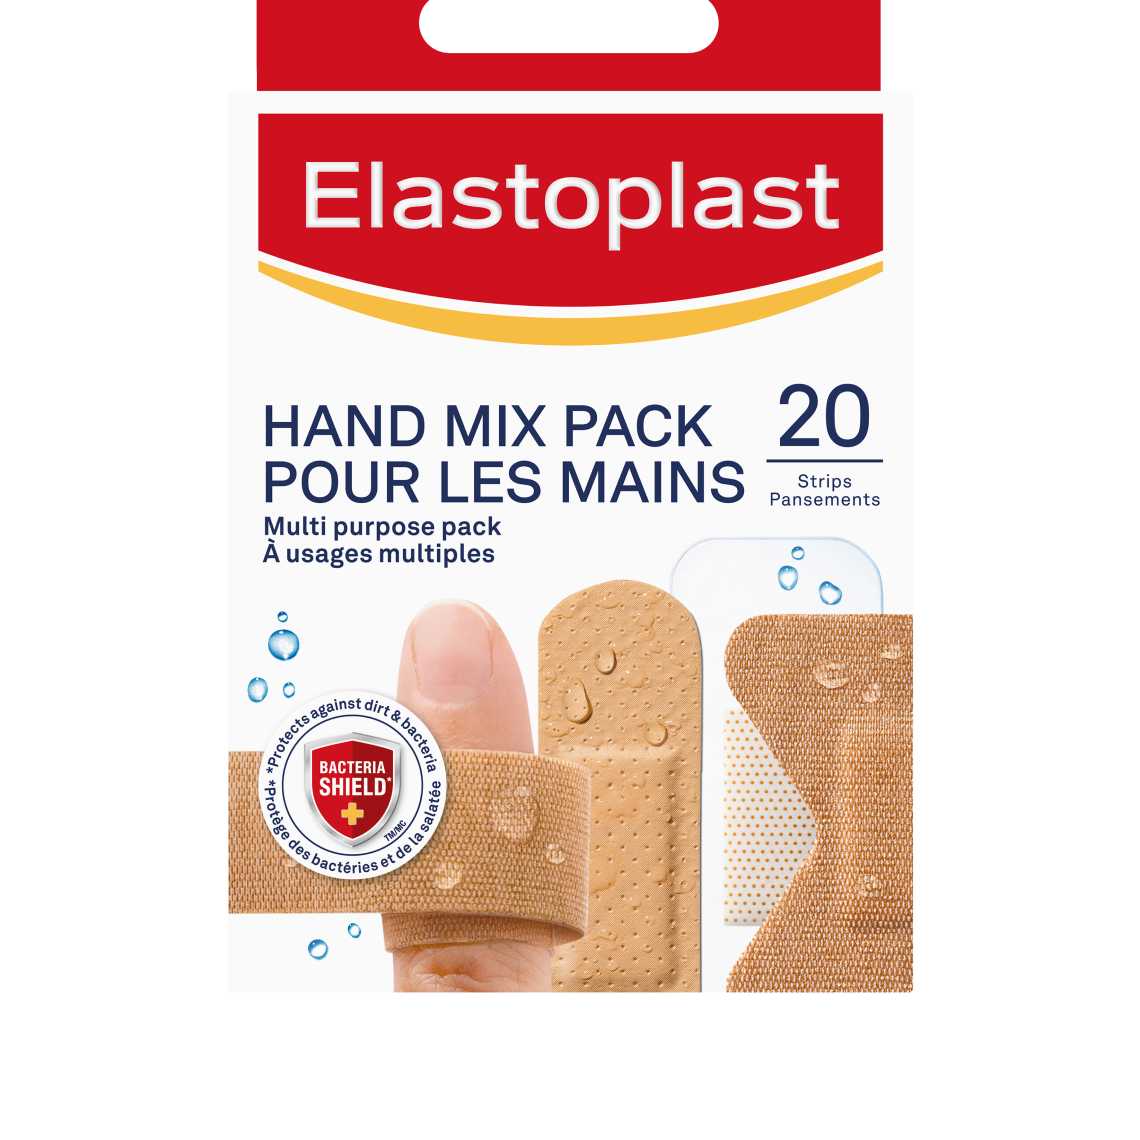 Hand Mix Pack